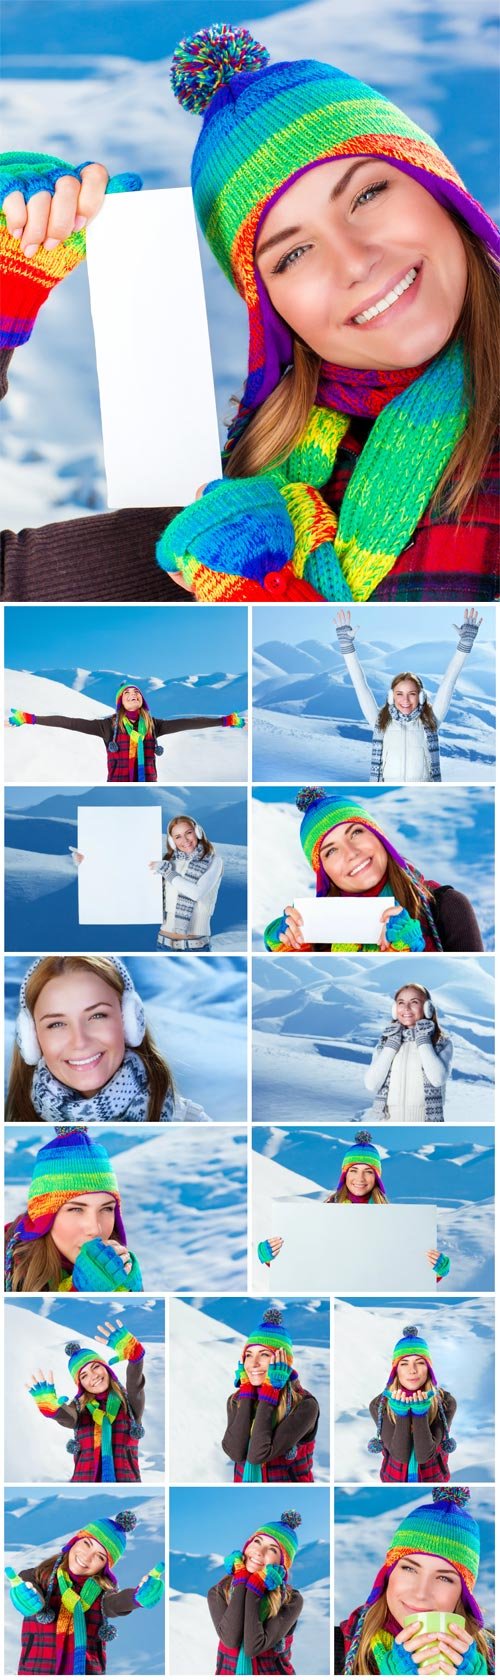 Winter vacation in the mountains stock photo №4